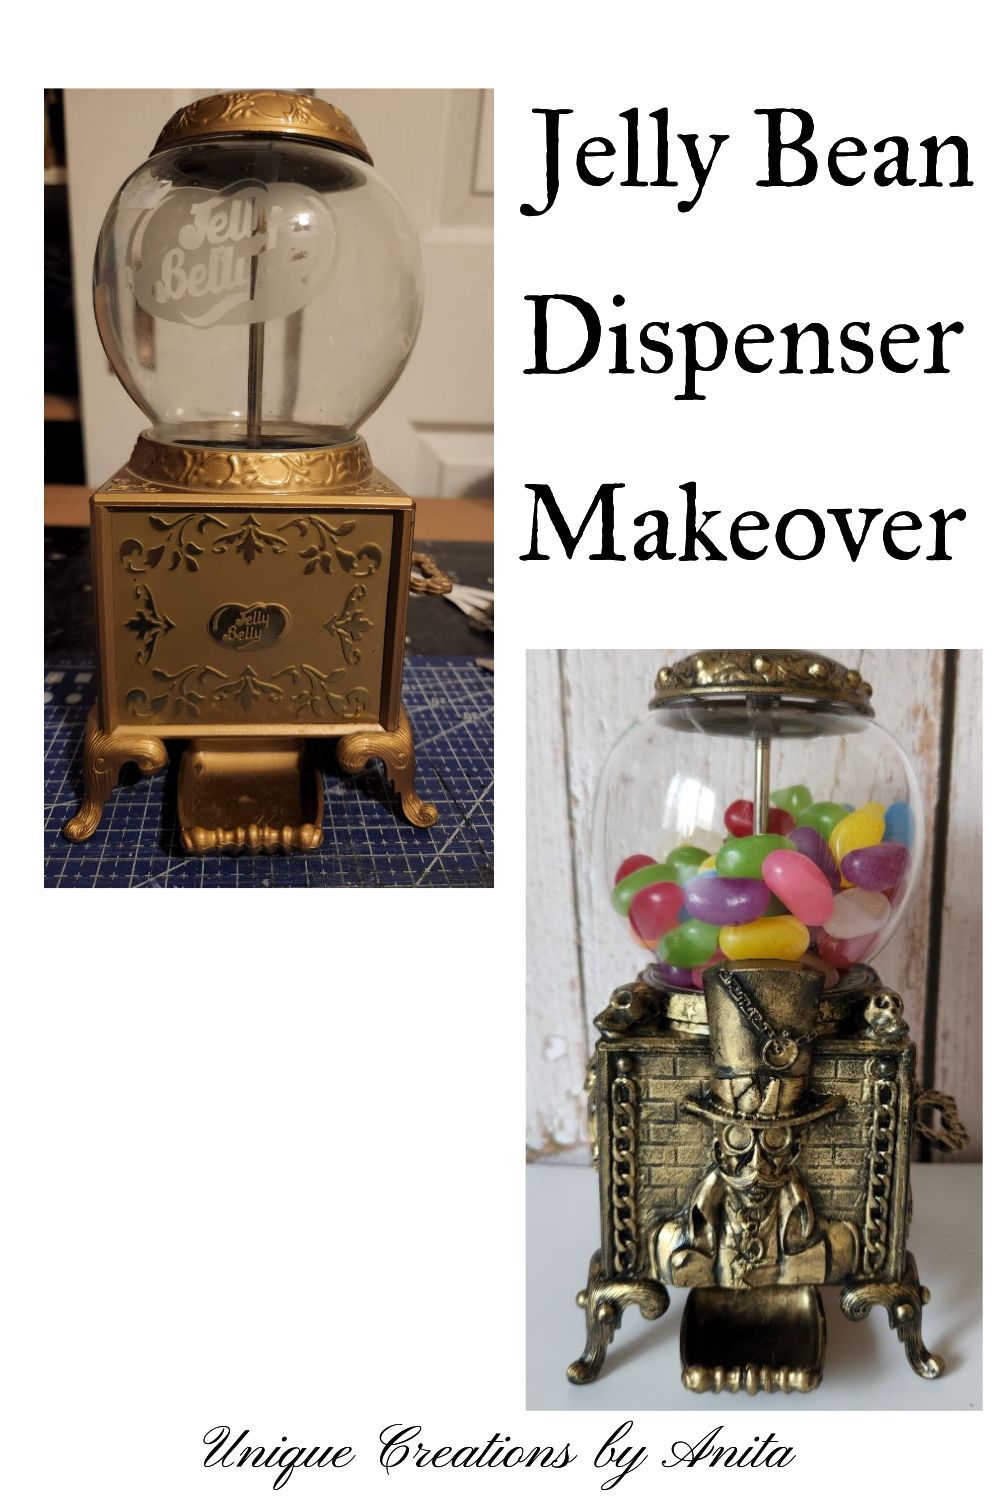 Old jelly bean dispenser gets a steampunk mixed media art makeover.